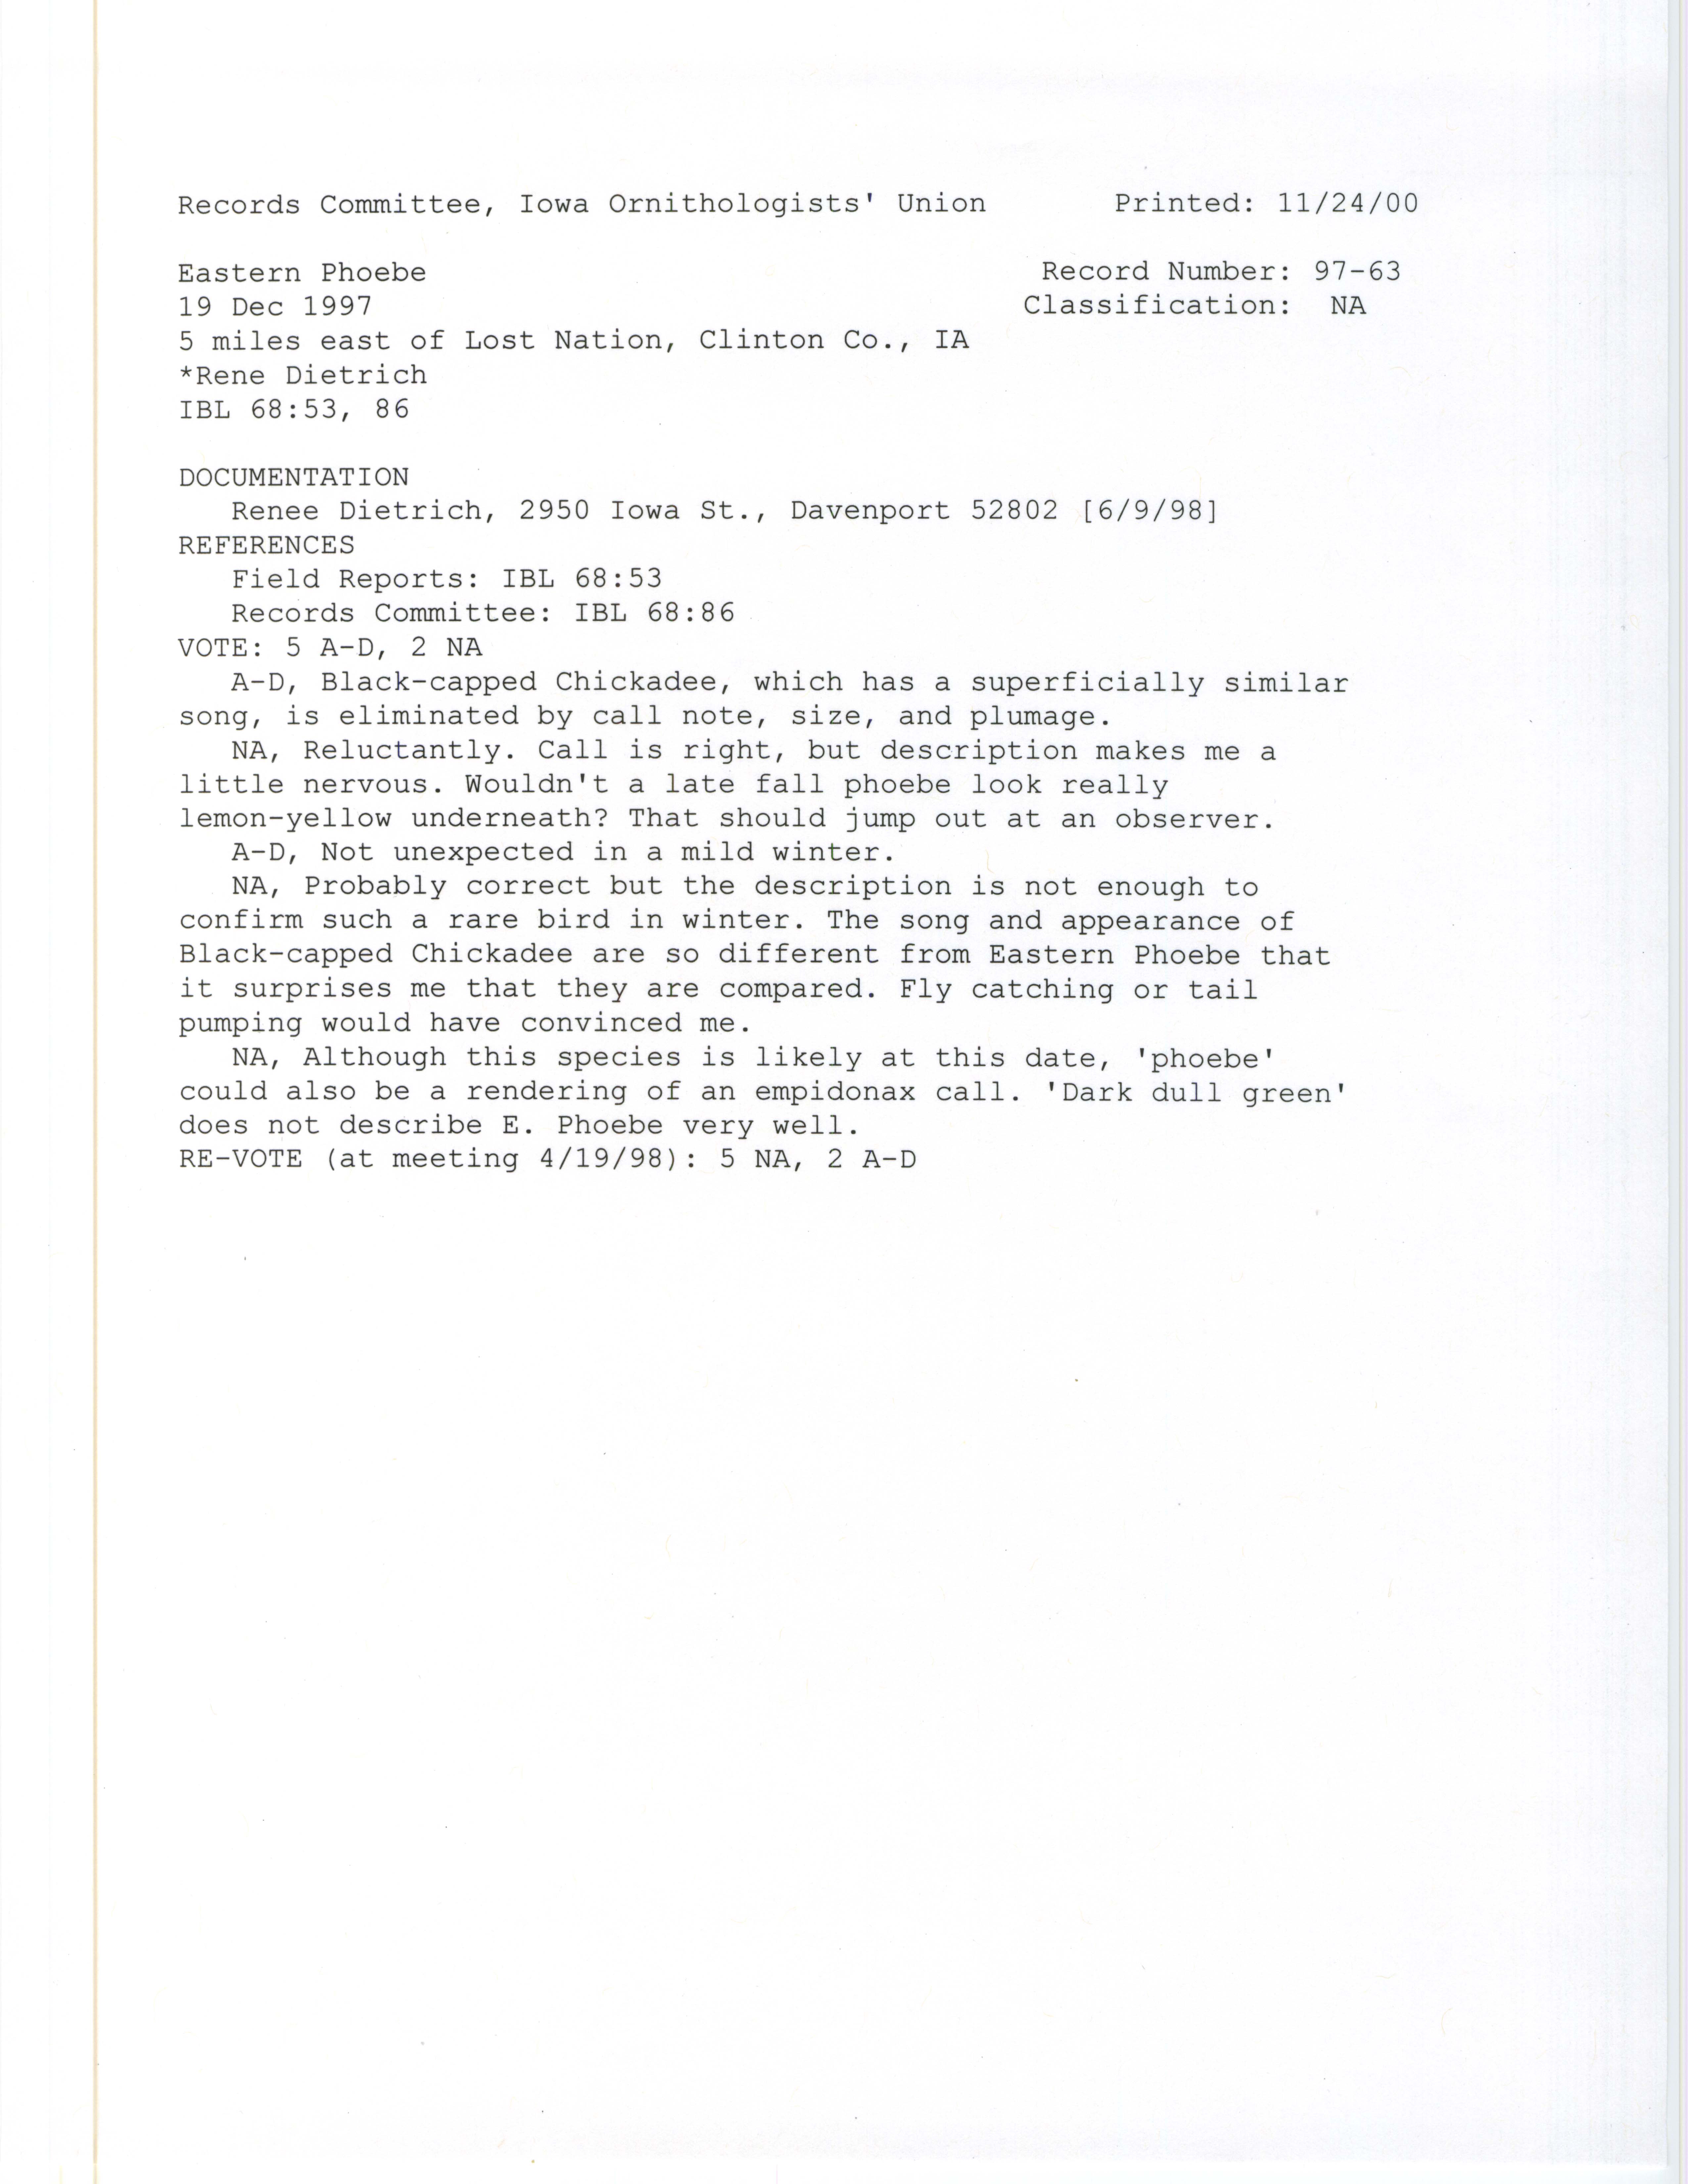 Records Committee review for rare bird sighting for Eastern Phoebe east of Lost Nation, 1997